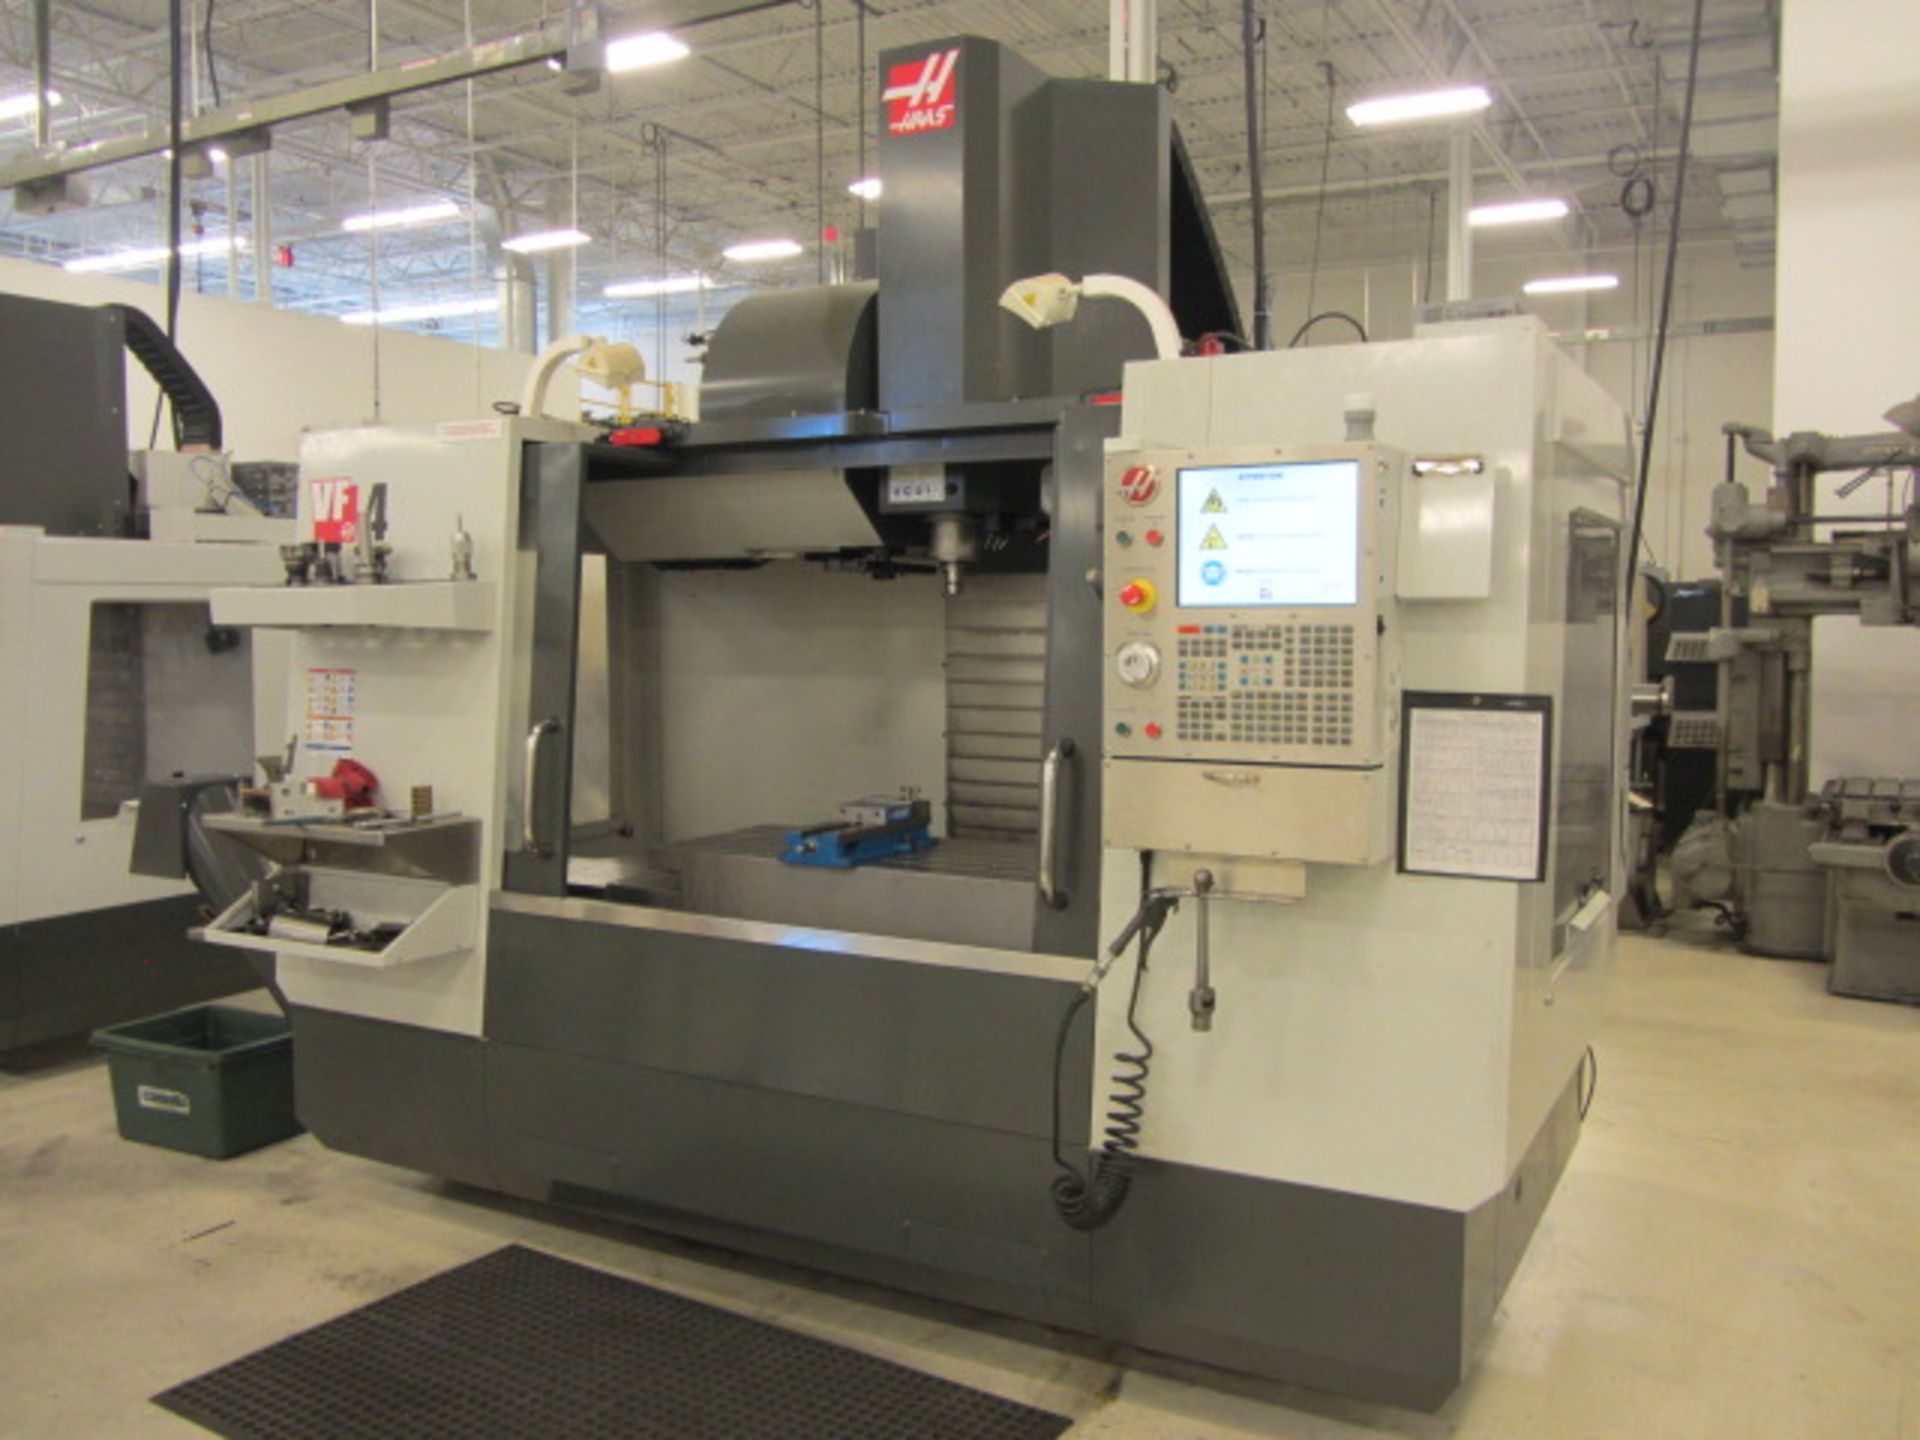 Haas VF-4 CNC Vertical Machining Center with 52'' x 18'' Table, #40 Taper Spindle Speeds to 8100 - Image 4 of 9